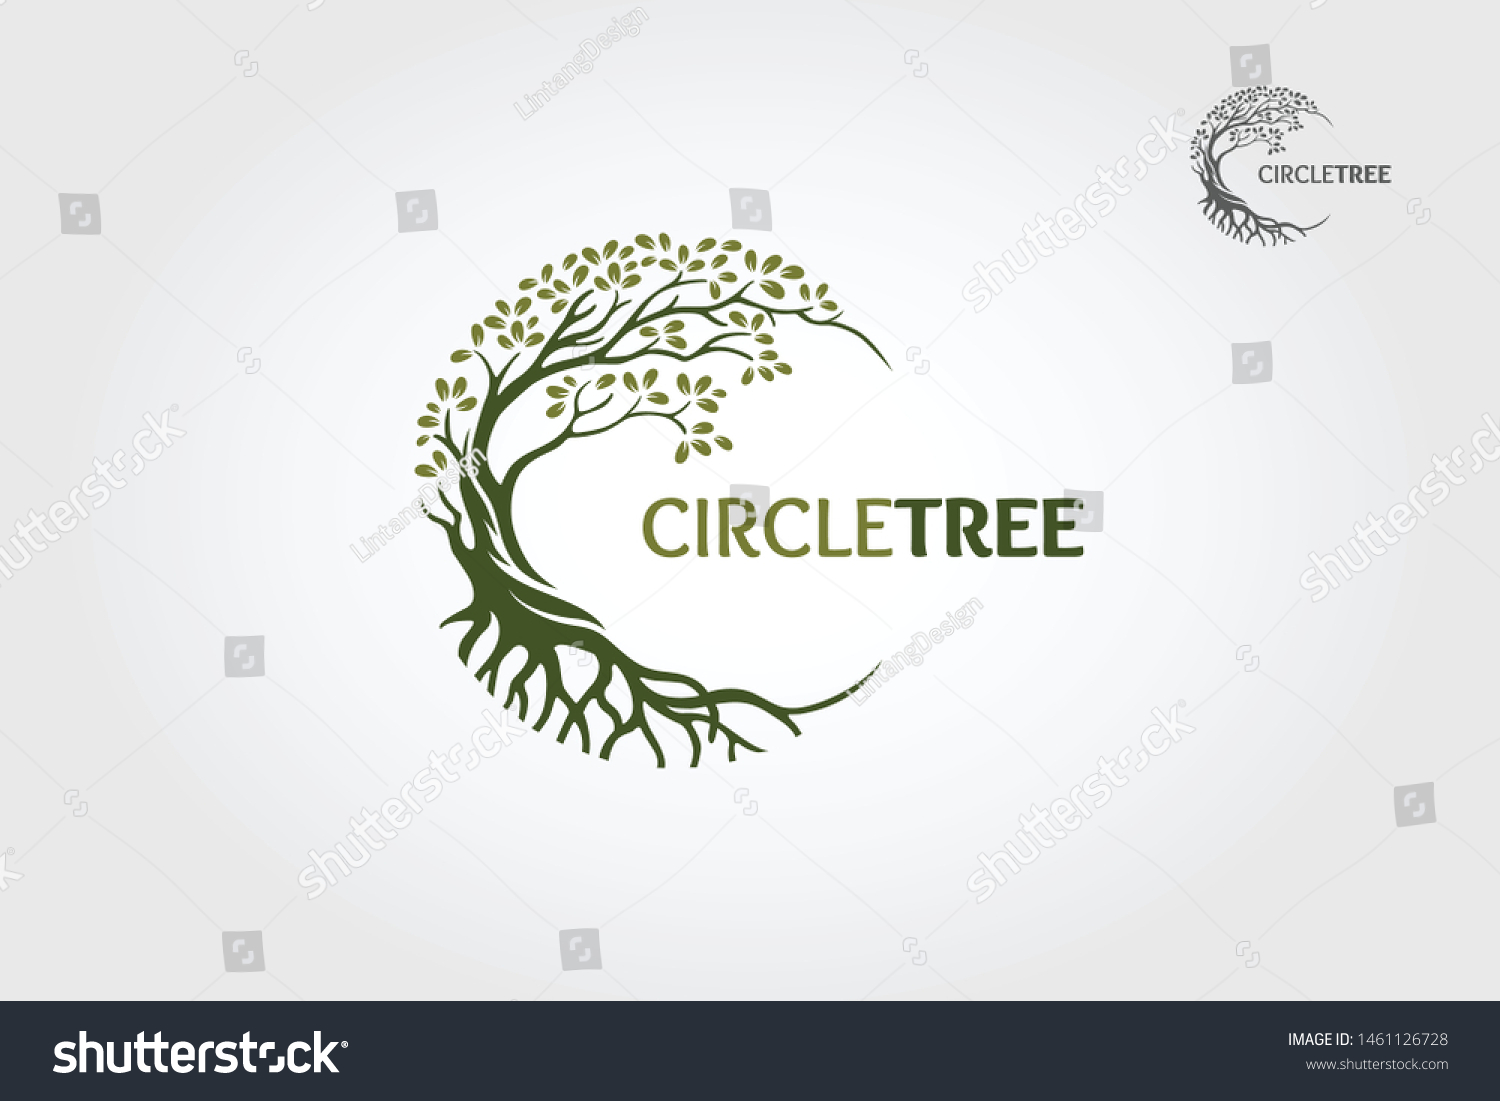 SVG of Circle Tree vector logo this beautiful tree is a symbol of life, beauty, growth, strength, and good health. svg